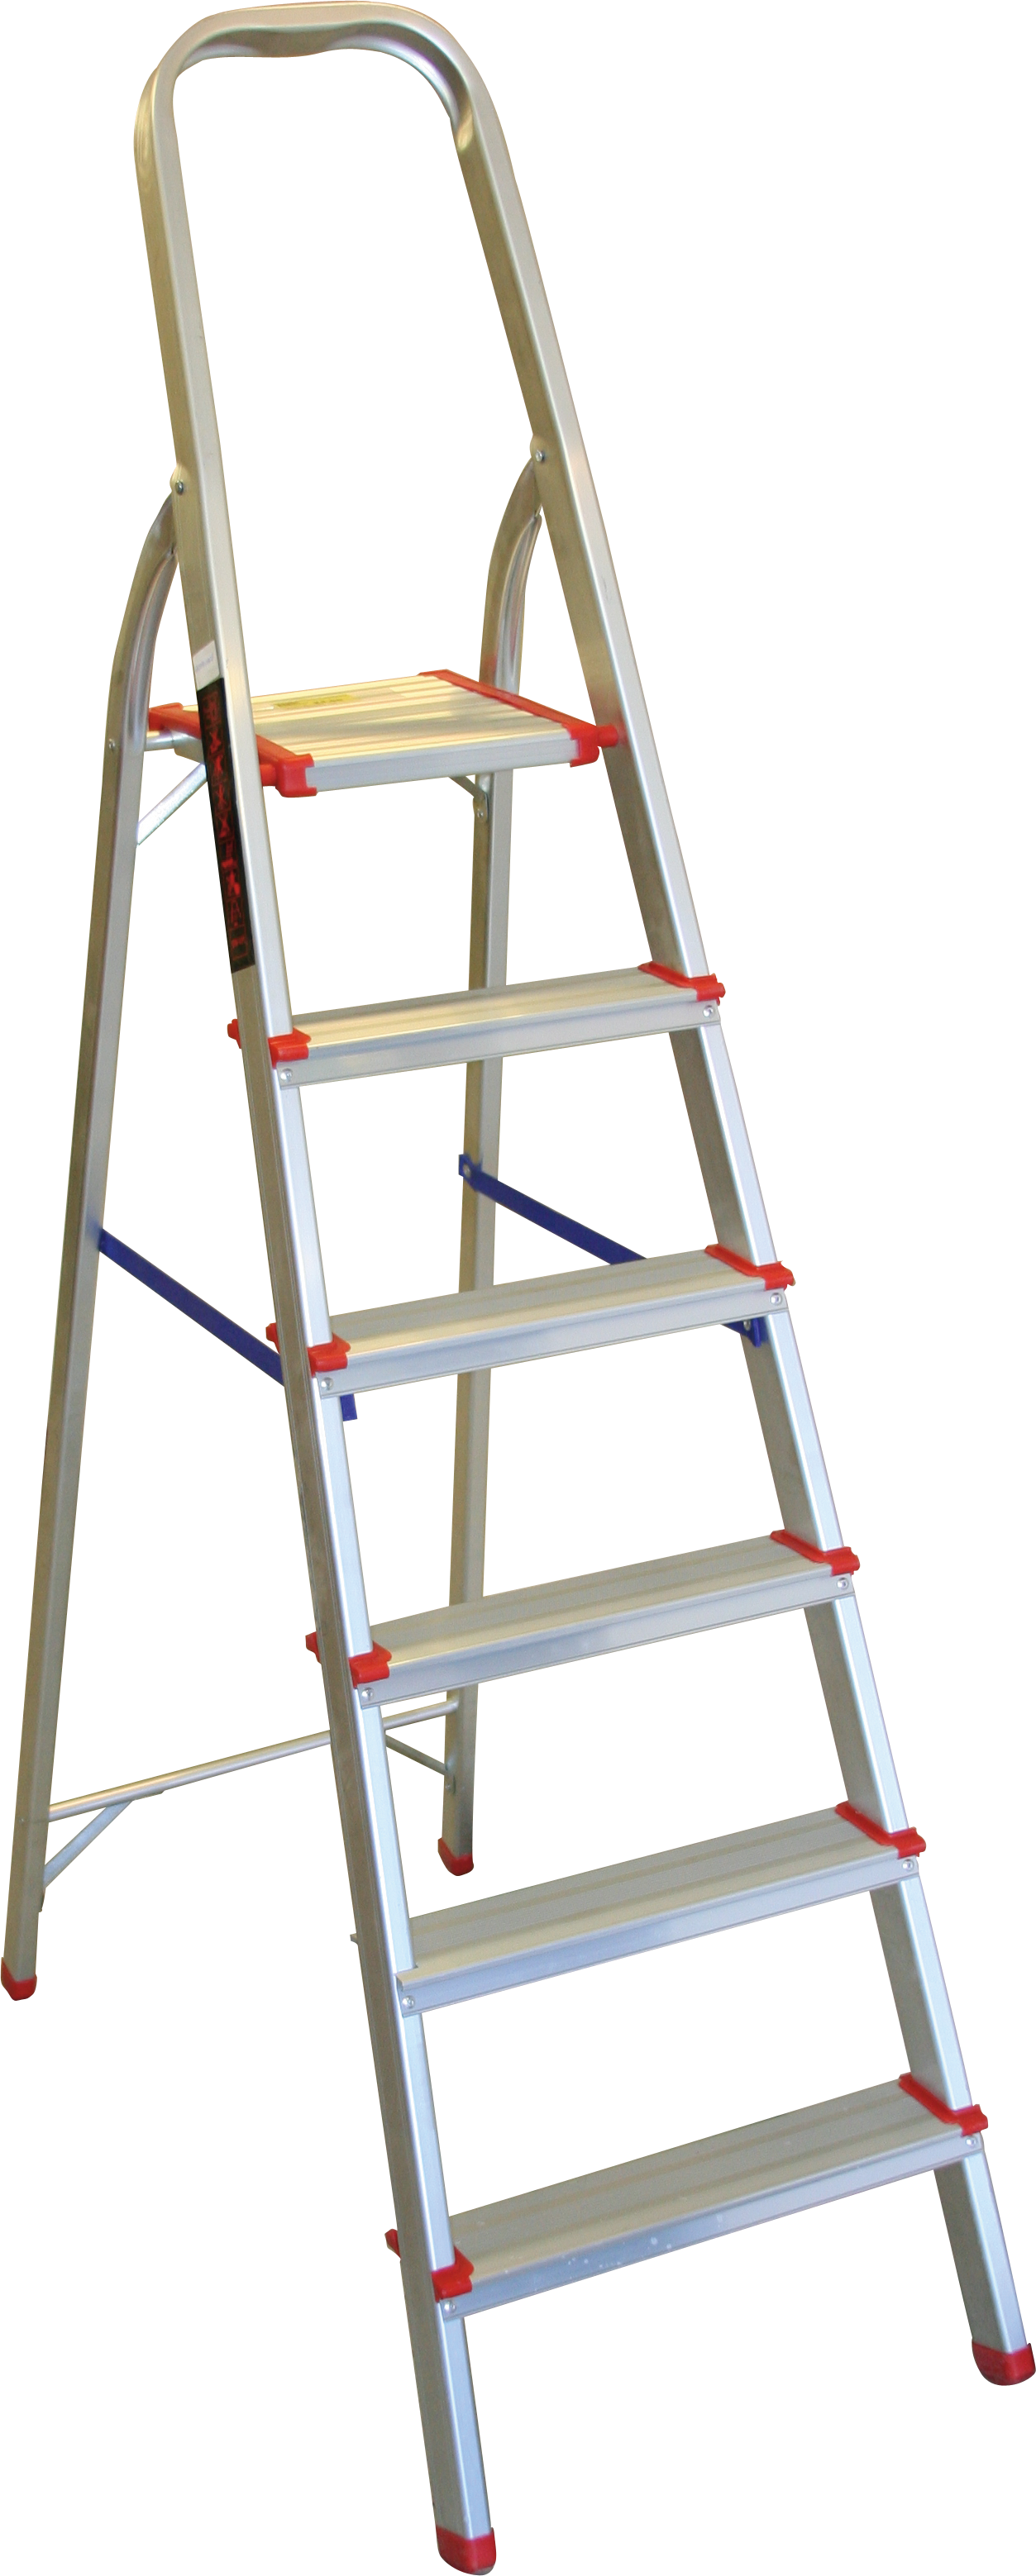 Ladder clipart short ladder. Icon web icons png